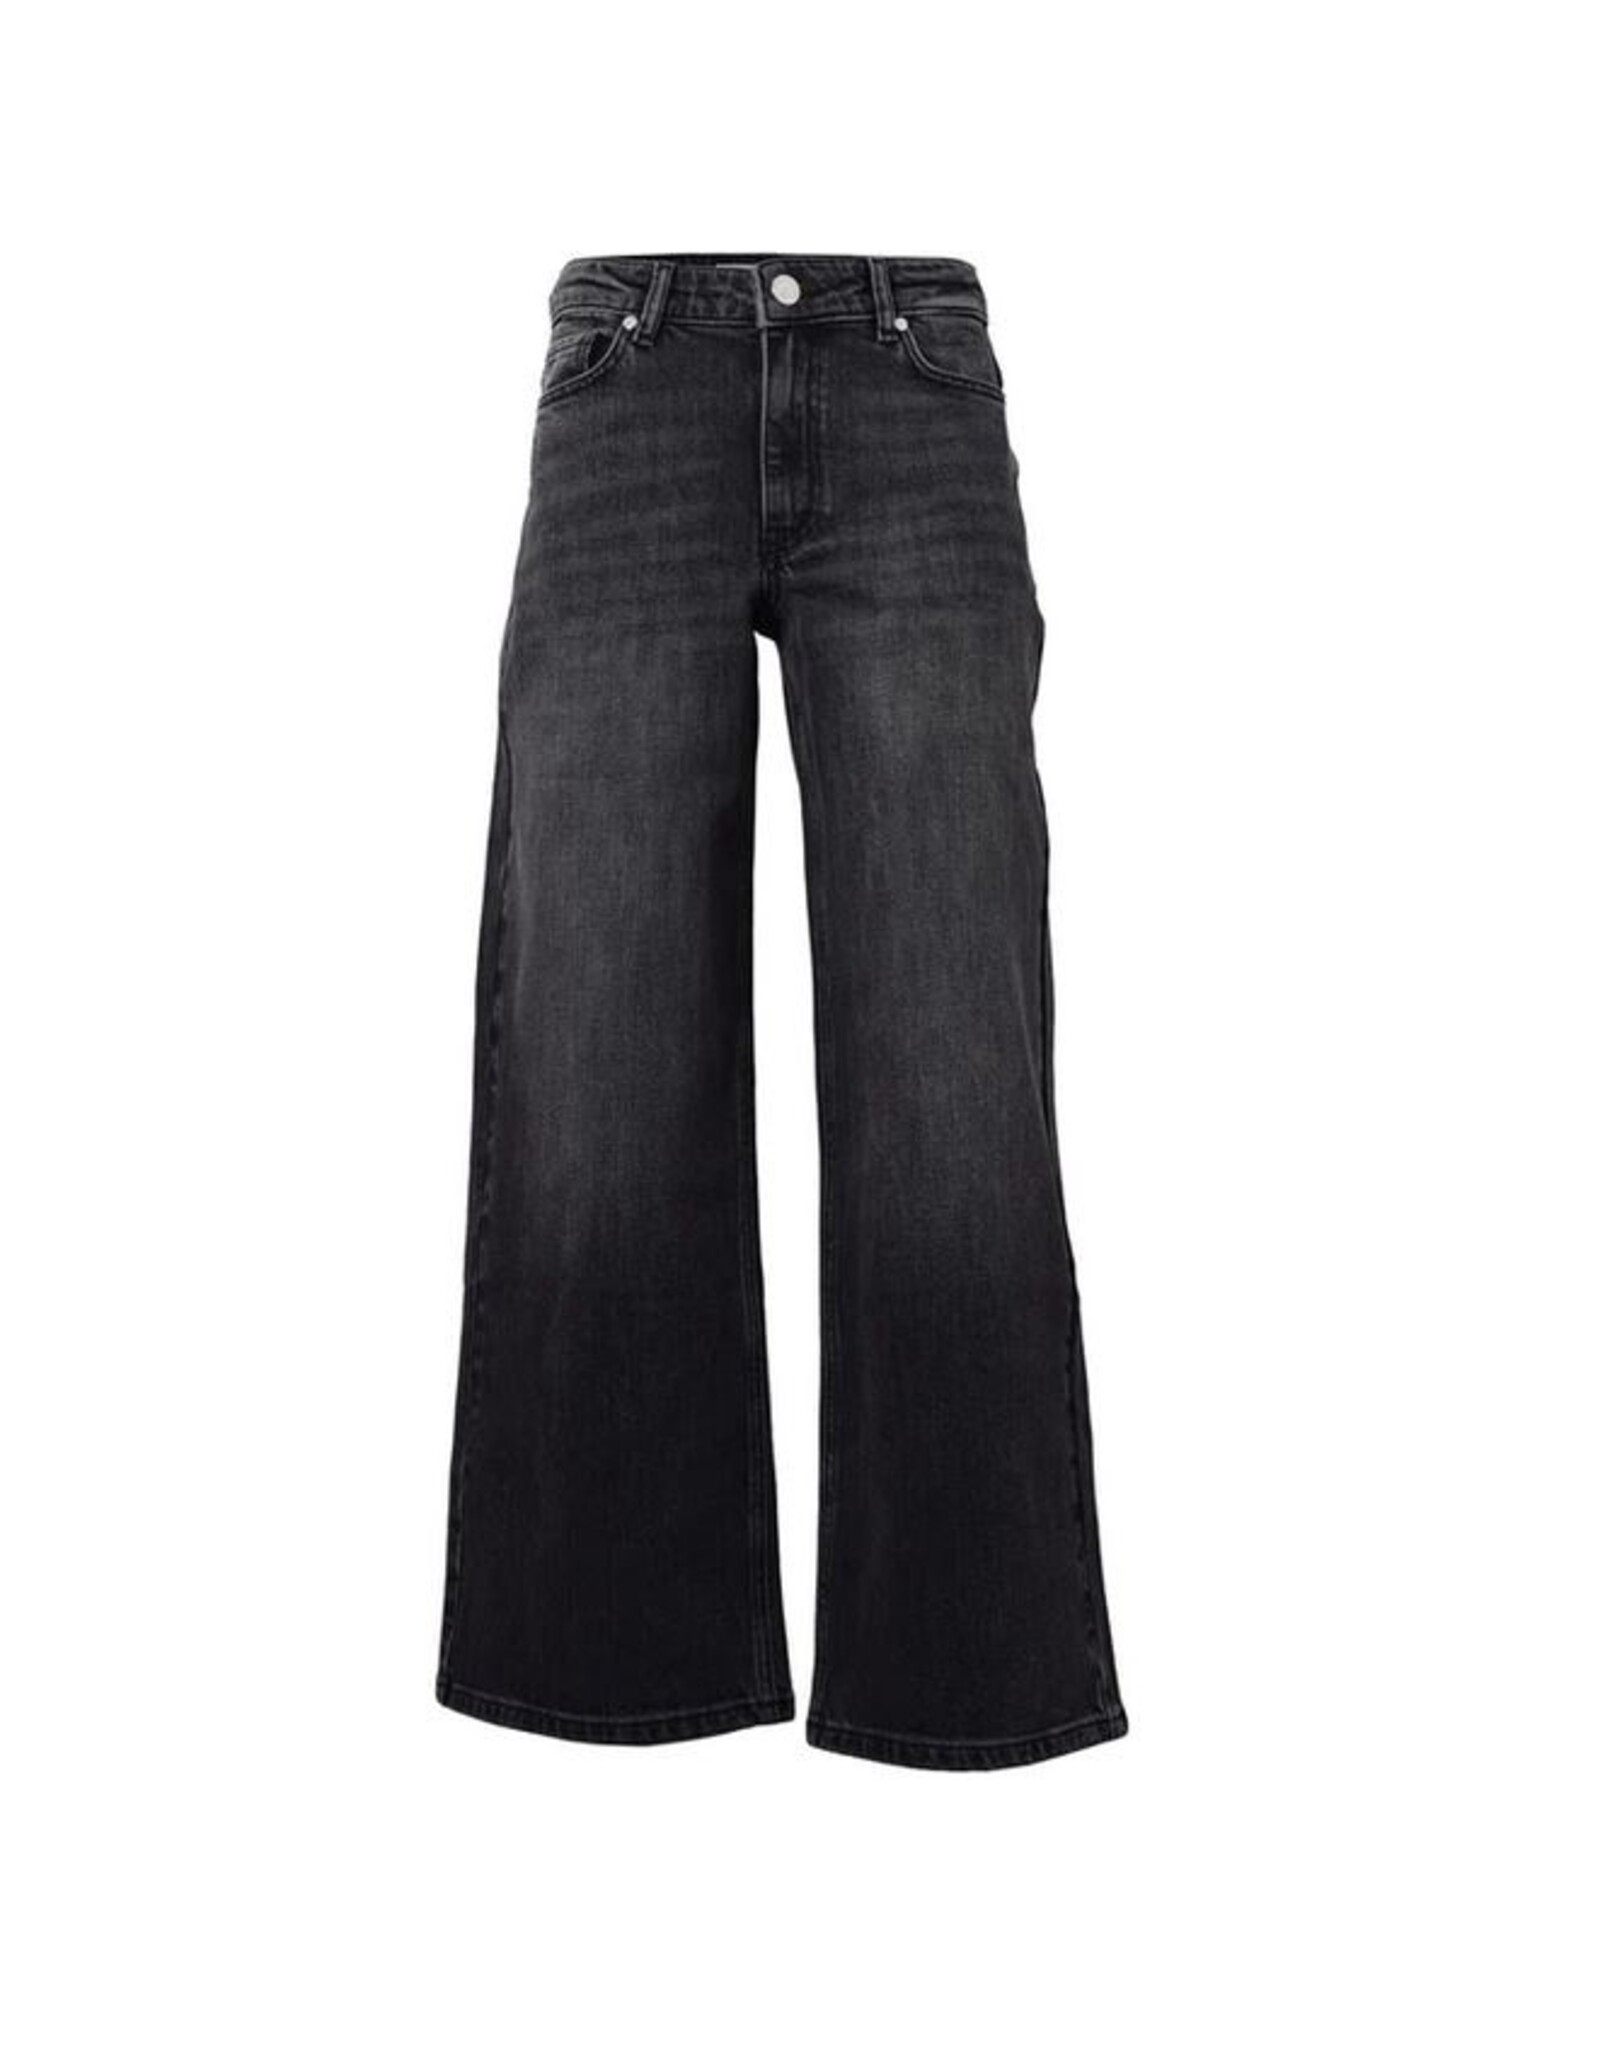 HOUNd extra wide jeans grey used G.